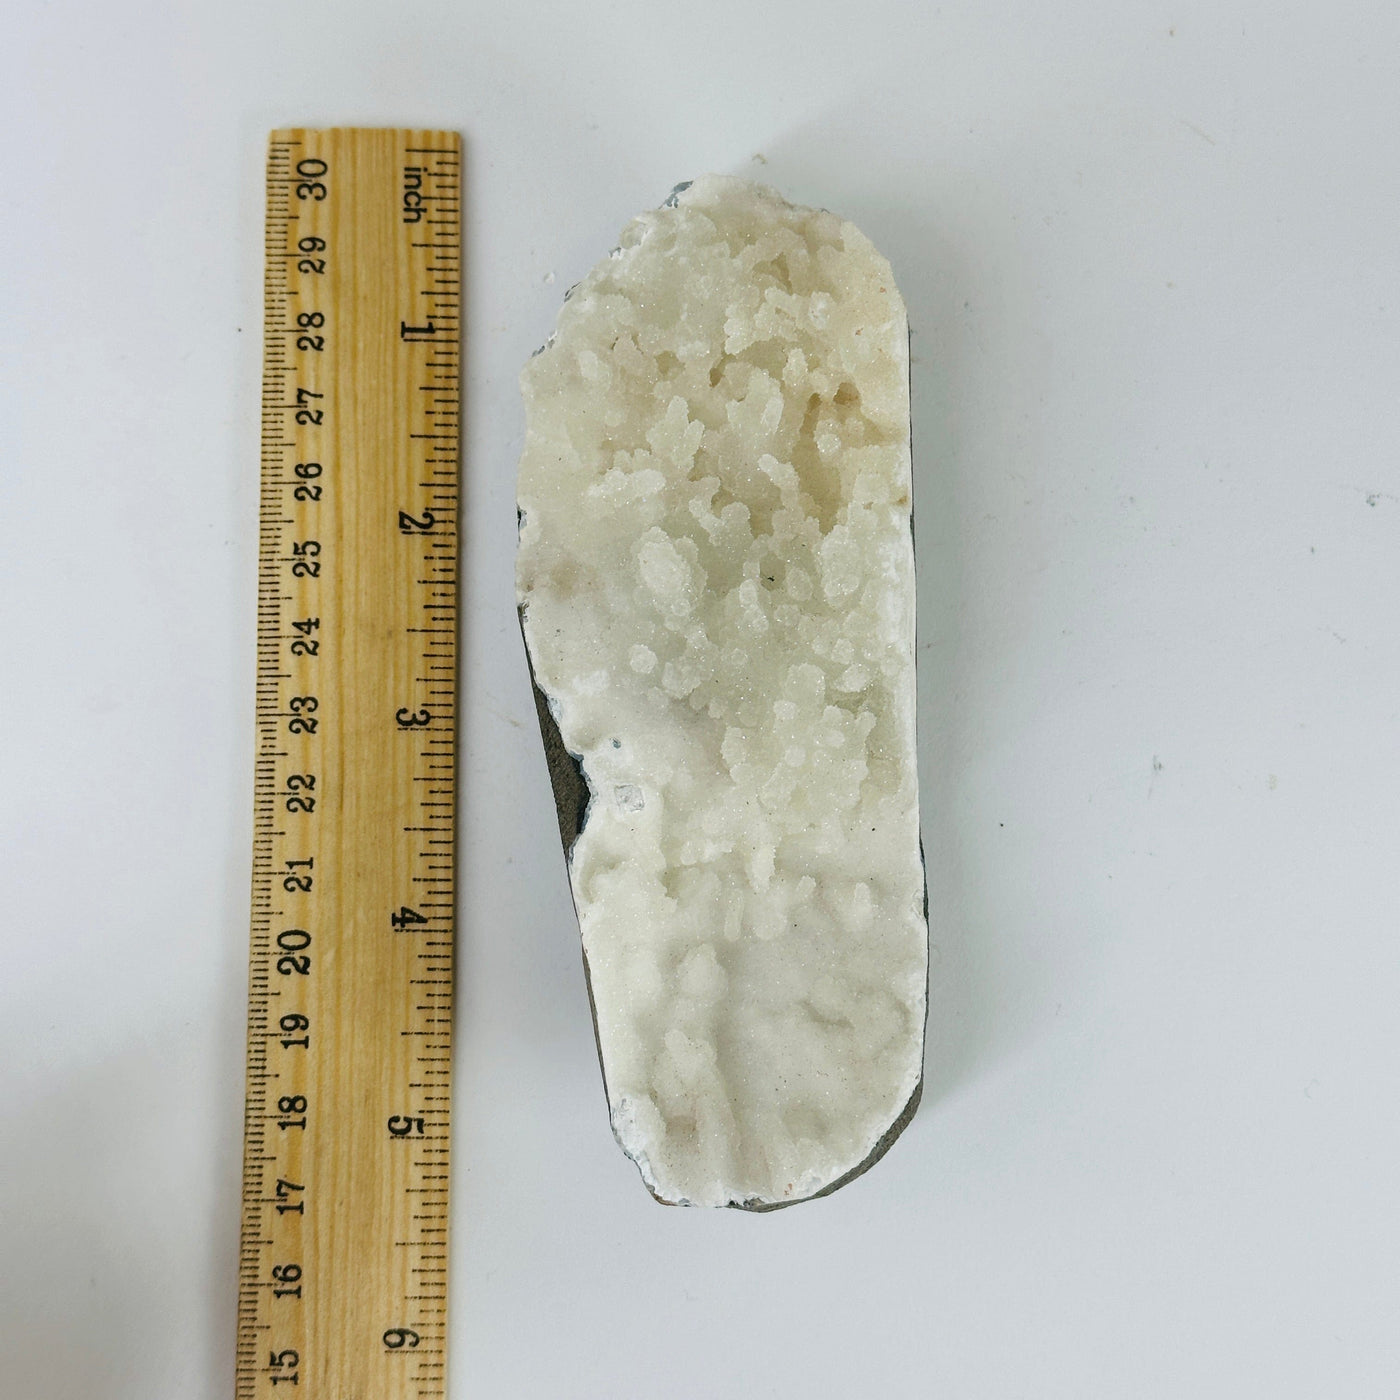 apophyllite on matrix next to a ruler for size reference